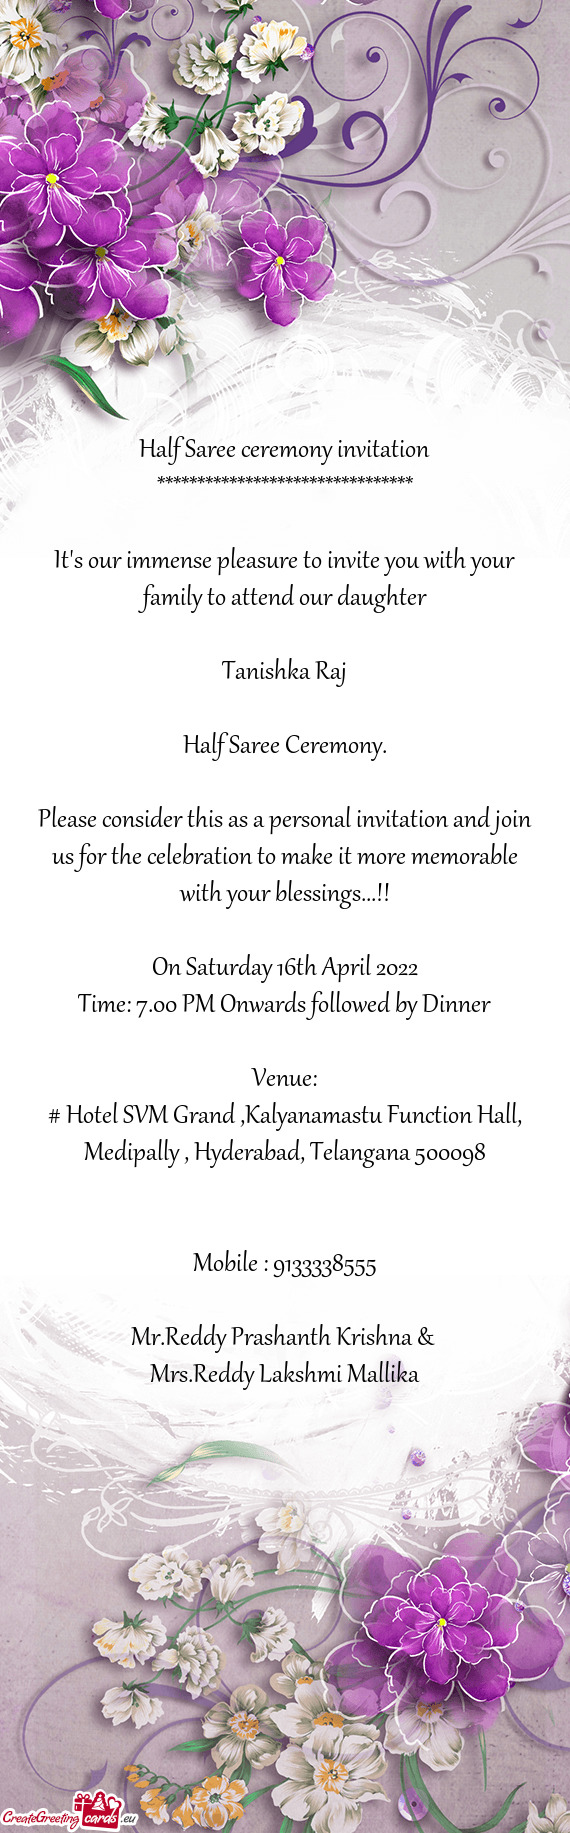 Please consider this as a personal invitation and join us for the celebration to make it more memora